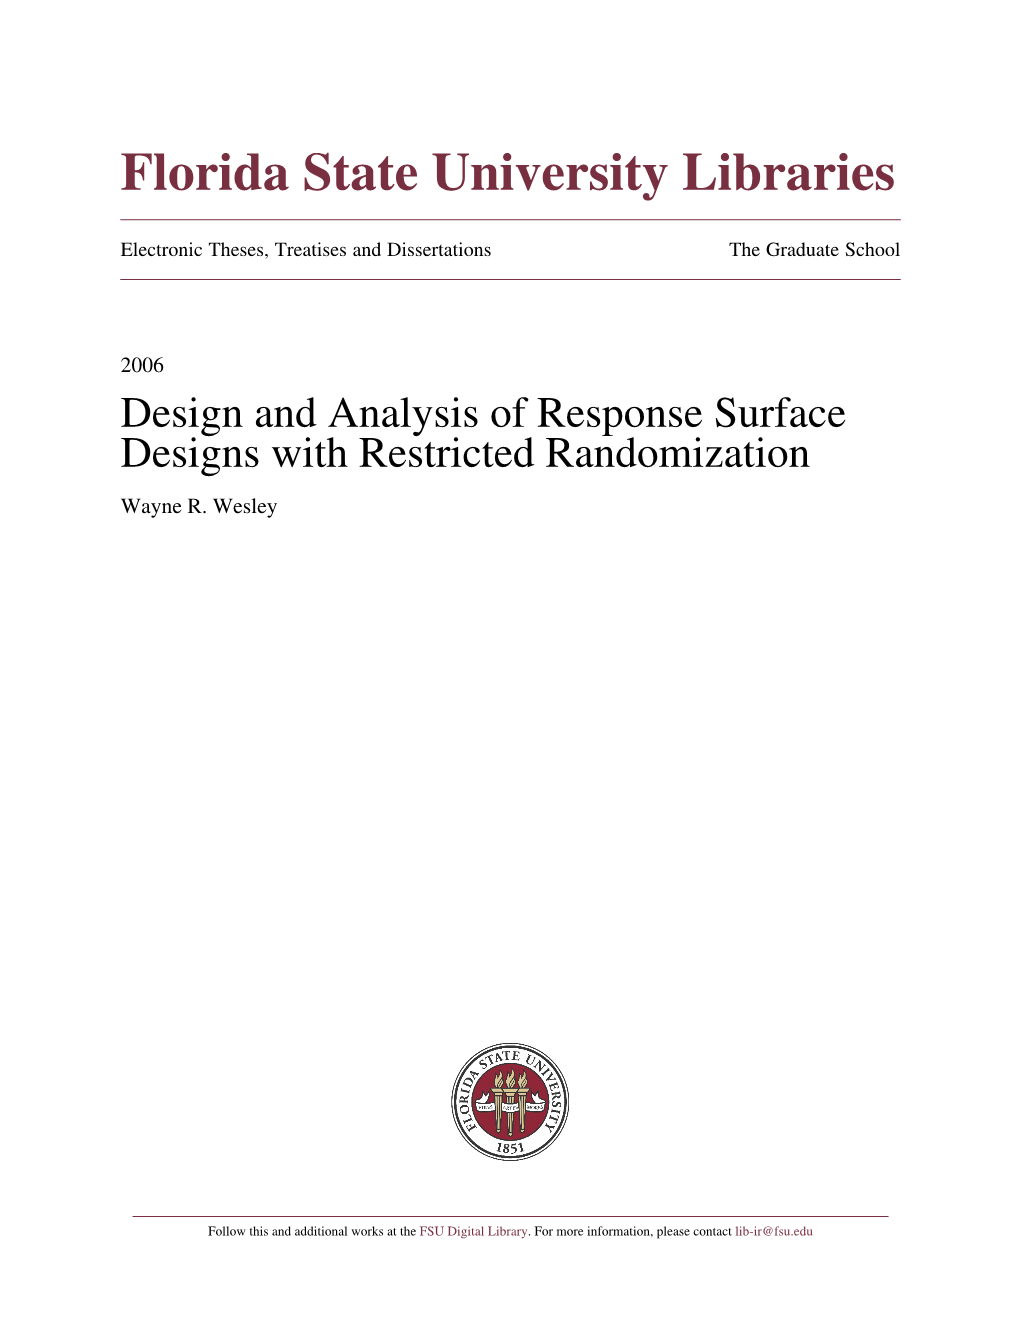 Design and Analysis of Response Surface Designs with Restricted Randomization Wayne R